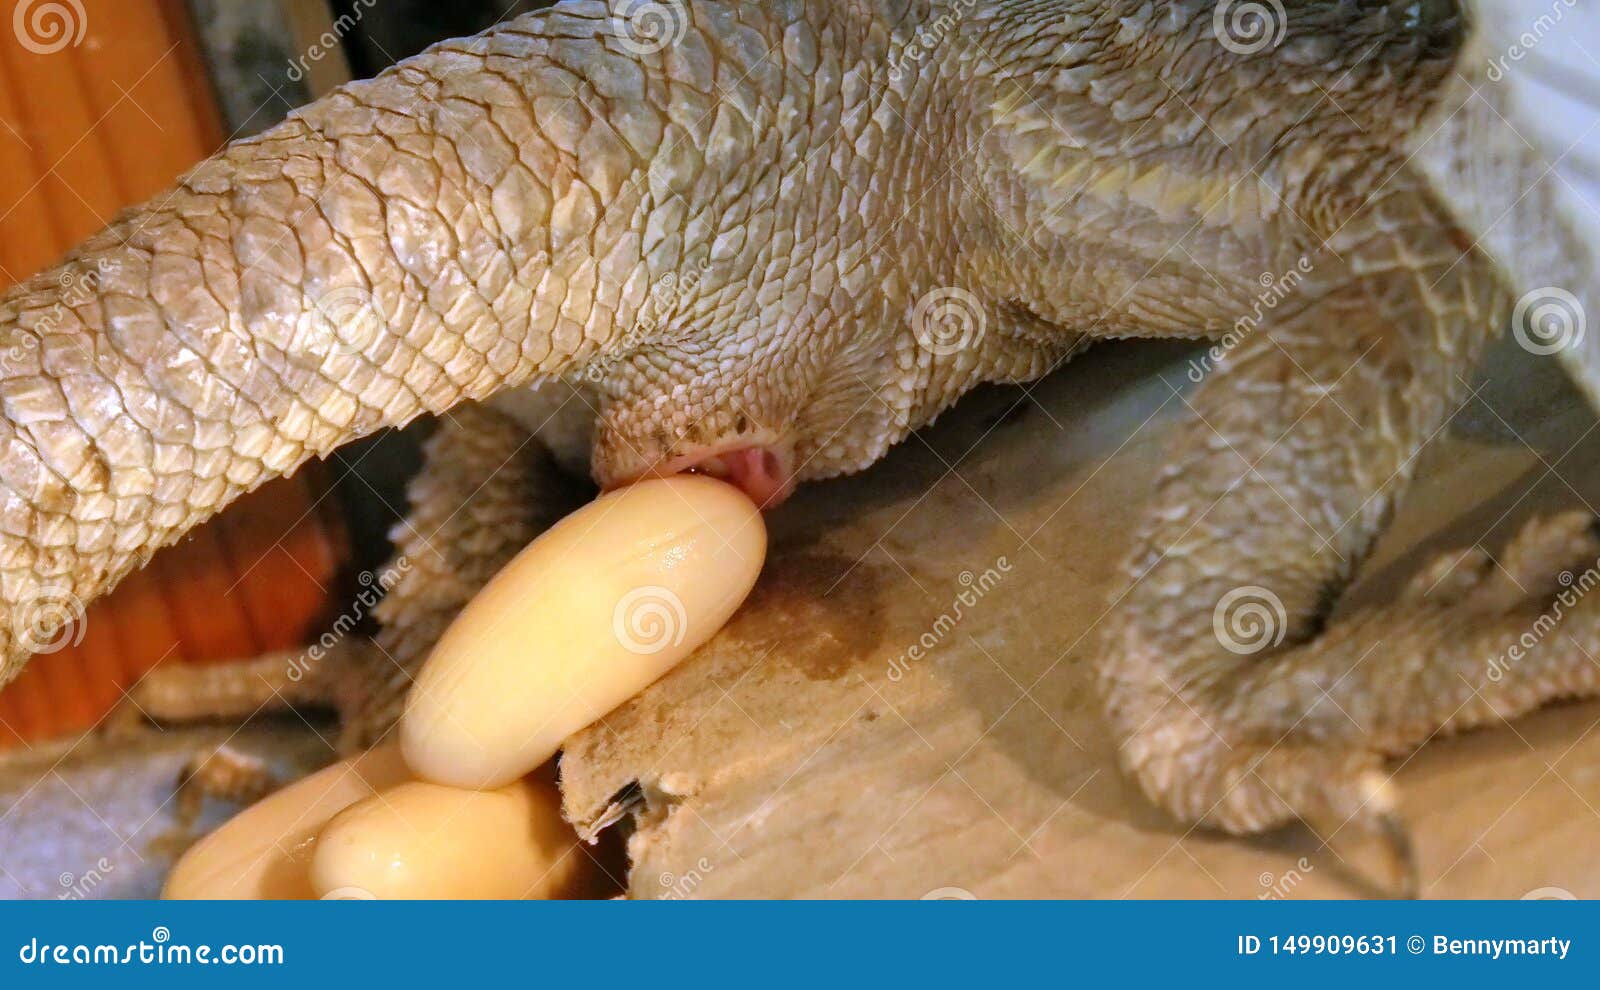 Bearded dragons laying eggs